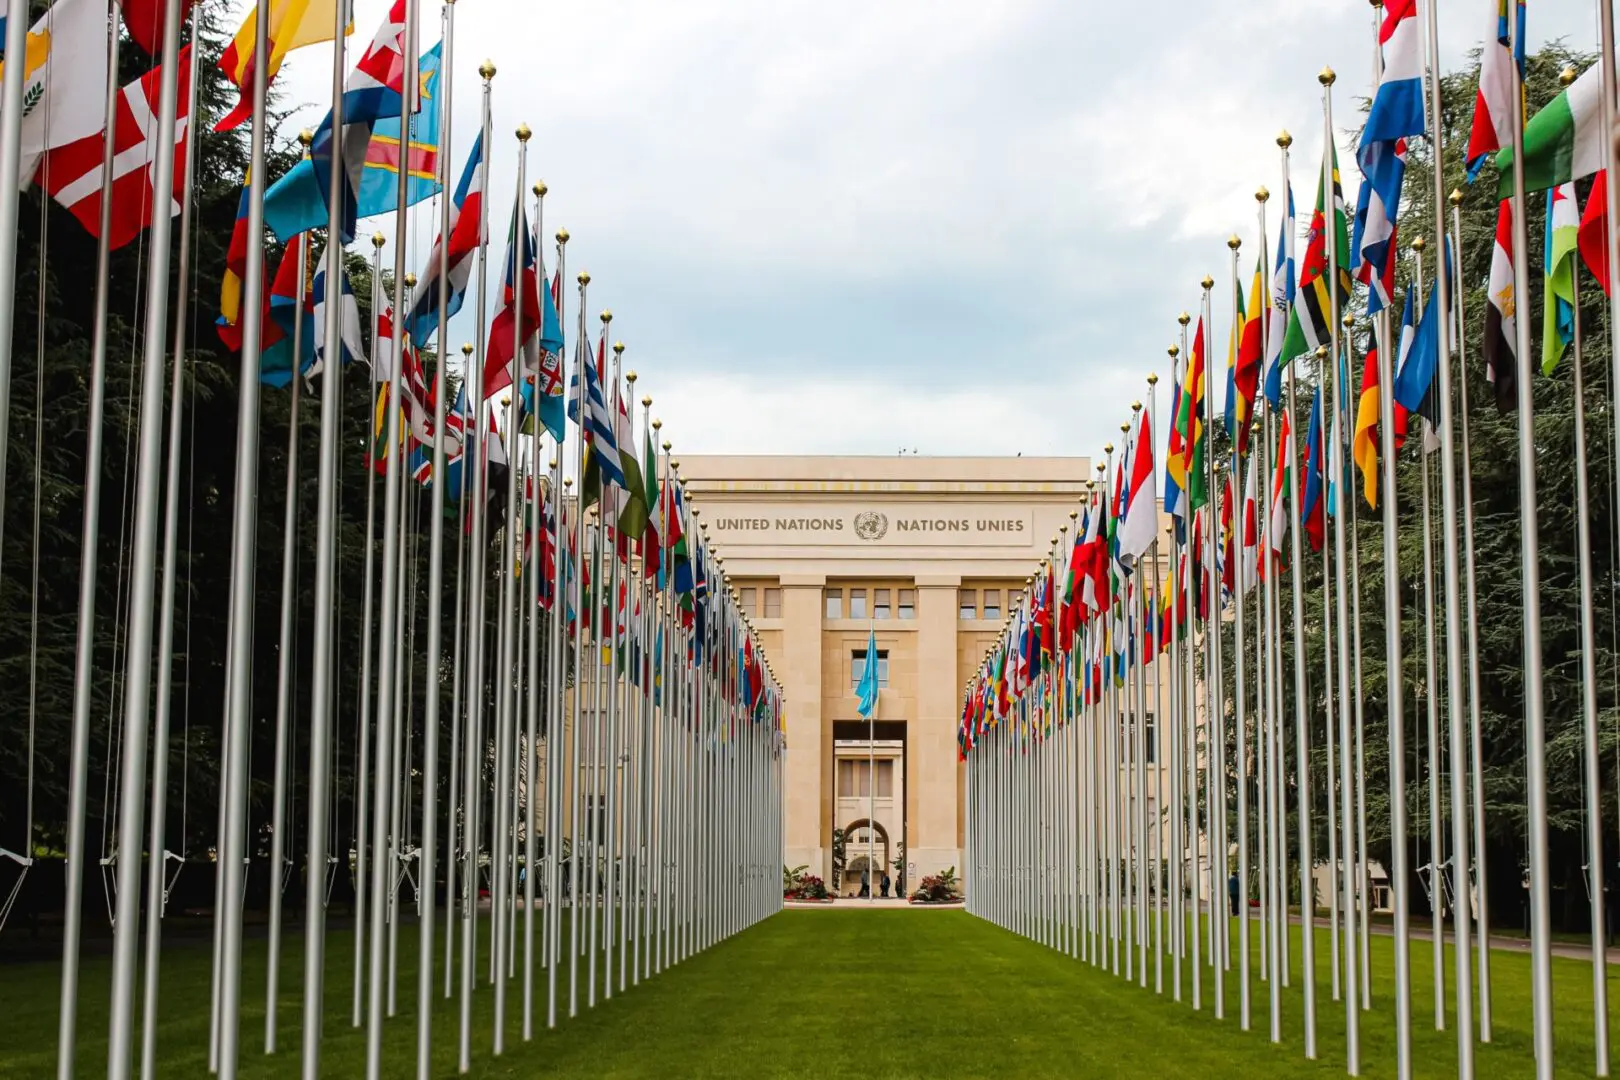 Flags of different countries lined up in front of the United Nations building